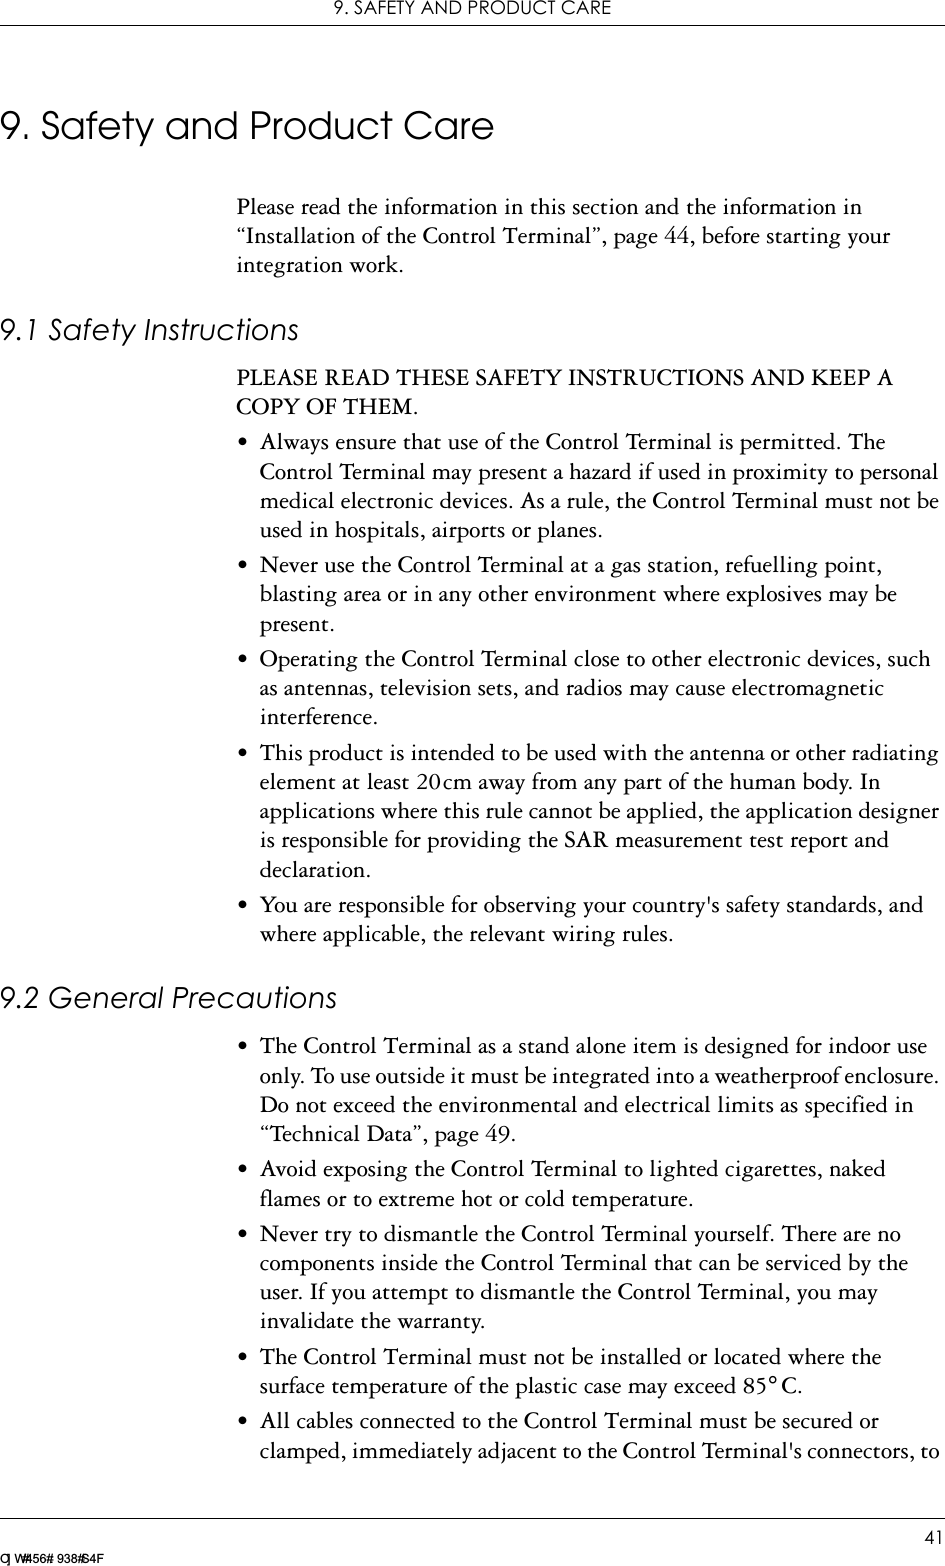 9. SAFETY AND PRODUCT CARE41LZ T 123 7605 P1C9. Safety and Product CarePlease read the information in this section and the information in “Installation of the Control Terminal”, page 44, before starting your integration work.9.1 Safety InstructionsPLEASE READ THESE SAFETY INSTRUCTIONS AND KEEP A COPY OF THEM.• Always ensure that use of the Control Terminal is permitted. The Control Terminal may present a hazard if used in proximity to personal medical electronic devices. As a rule, the Control Terminal must not be used in hospitals, airports or planes.• Never use the Control Terminal at a gas station, refuelling point, blasting area or in any other environment where explosives may be present.• Operating the Control Terminal close to other electronic devices, such as antennas, television sets, and radios may cause electromagnetic interference.• This product is intended to be used with the antenna or other radiating element at least 20cm away from any part of the human body. In applications where this rule cannot be applied, the application designer is responsible for providing the SAR measurement test report and declaration.• You are responsible for observing your country&apos;s safety standards, and where applicable, the relevant wiring rules.9.2 General Precautions• The Control Terminal as a stand alone item is designed for indoor use only. To use outside it must be integrated into a weatherproof enclosure. Do not exceed the environmental and electrical limits as specified in “Technical Data”, page 49.• Avoid exposing the Control Terminal to lighted cigarettes, naked flames or to extreme hot or cold temperature.• Never try to dismantle the Control Terminal yourself. There are no components inside the Control Terminal that can be serviced by the user. If you attempt to dismantle the Control Terminal, you may invalidate the warranty.• The Control Terminal must not be installed or located where the surface temperature of the plastic case may exceed 85°C.• All cables connected to the Control Terminal must be secured or clamped, immediately adjacent to the Control Terminal&apos;s connectors, to 